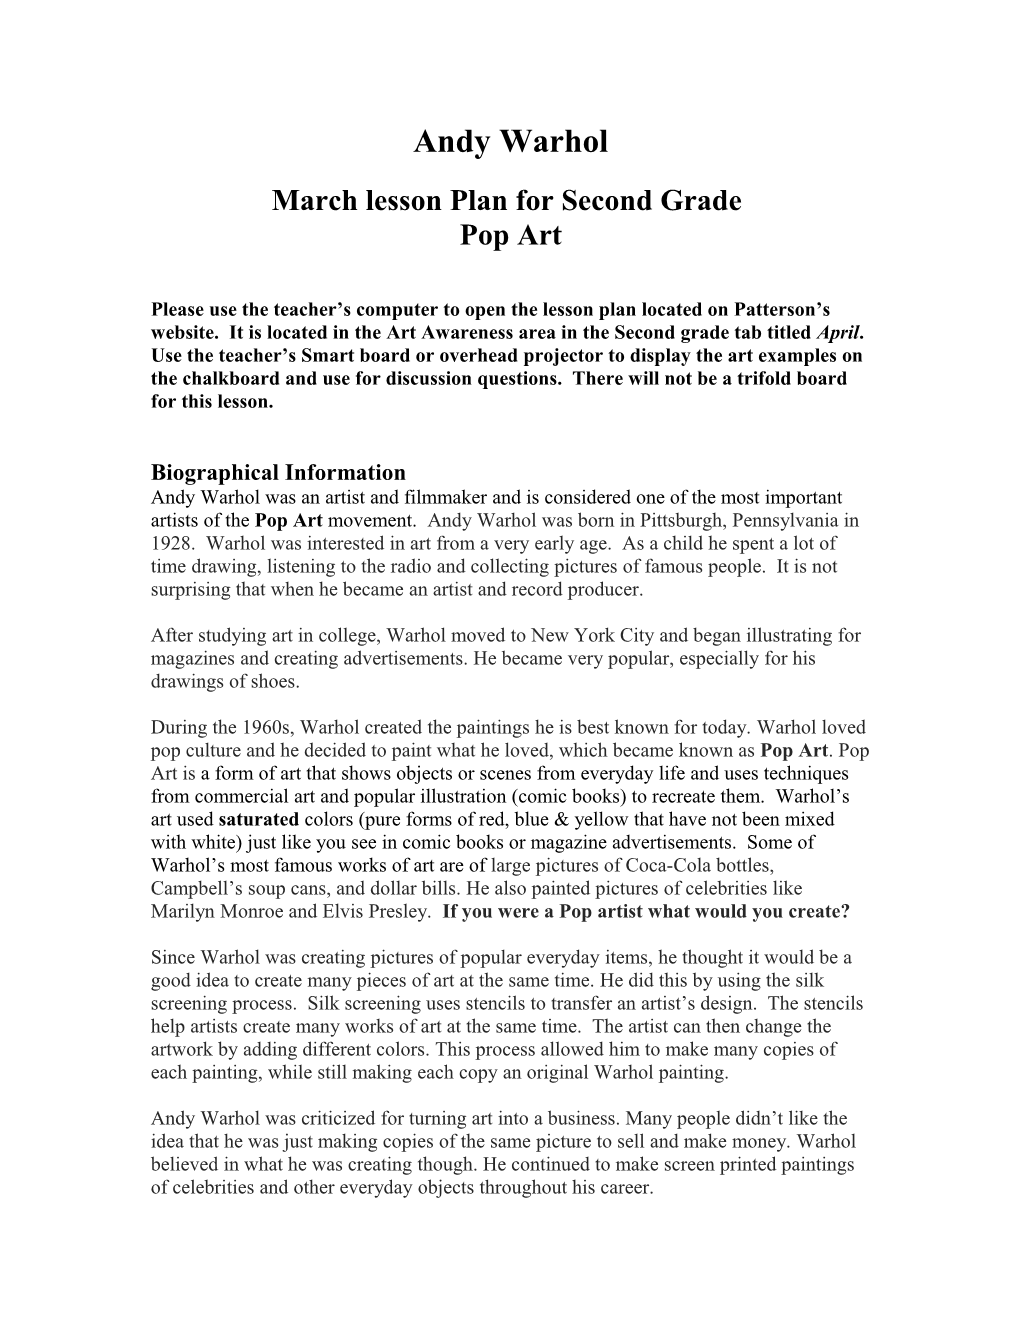 March Lesson Plan for Second Grade